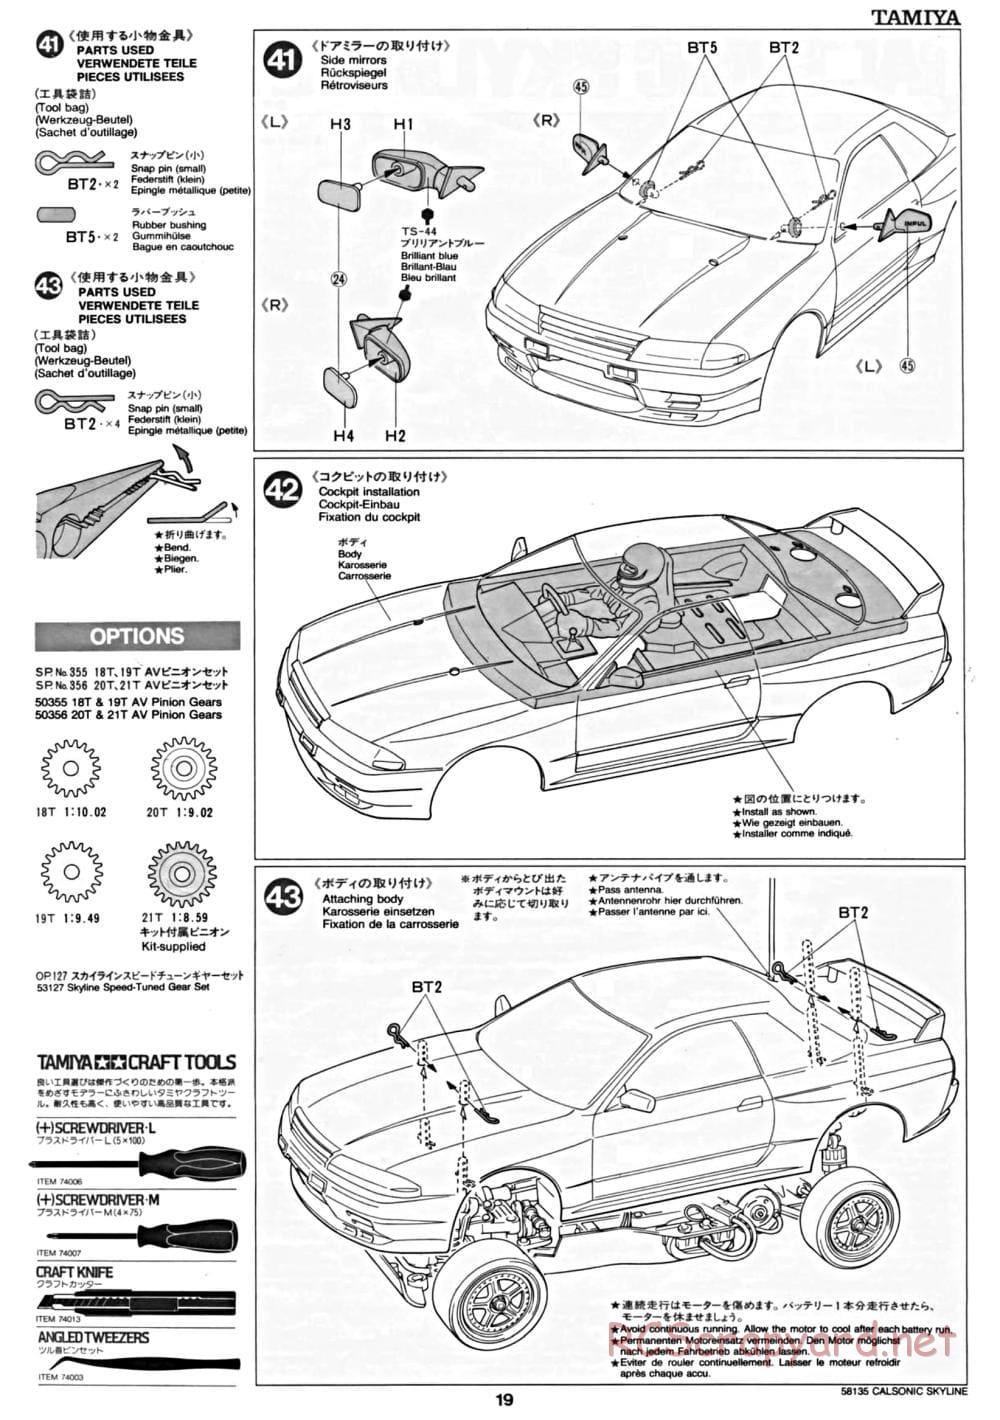 Tamiya - Calsonic Skyline GT-R Gr.A - TA-02 Chassis - Manual - Page 19